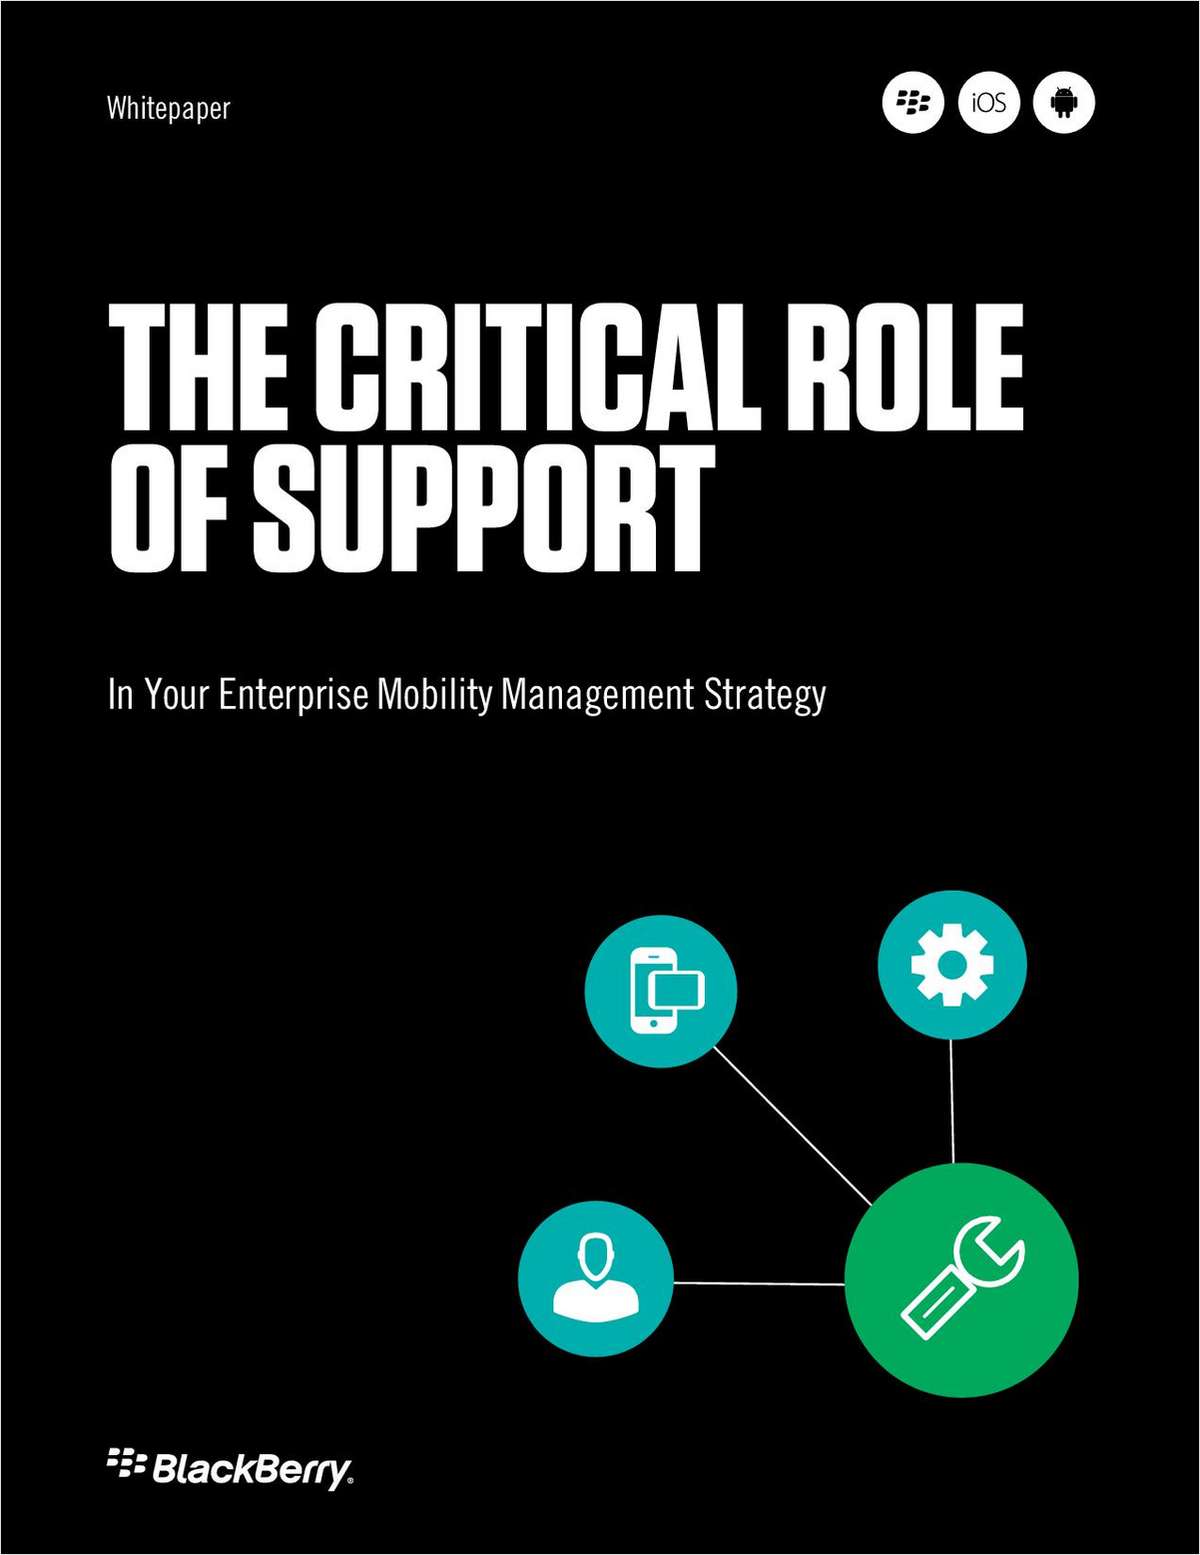 The Critical Role of Support in Your Enterprise Mobility Management Strategy